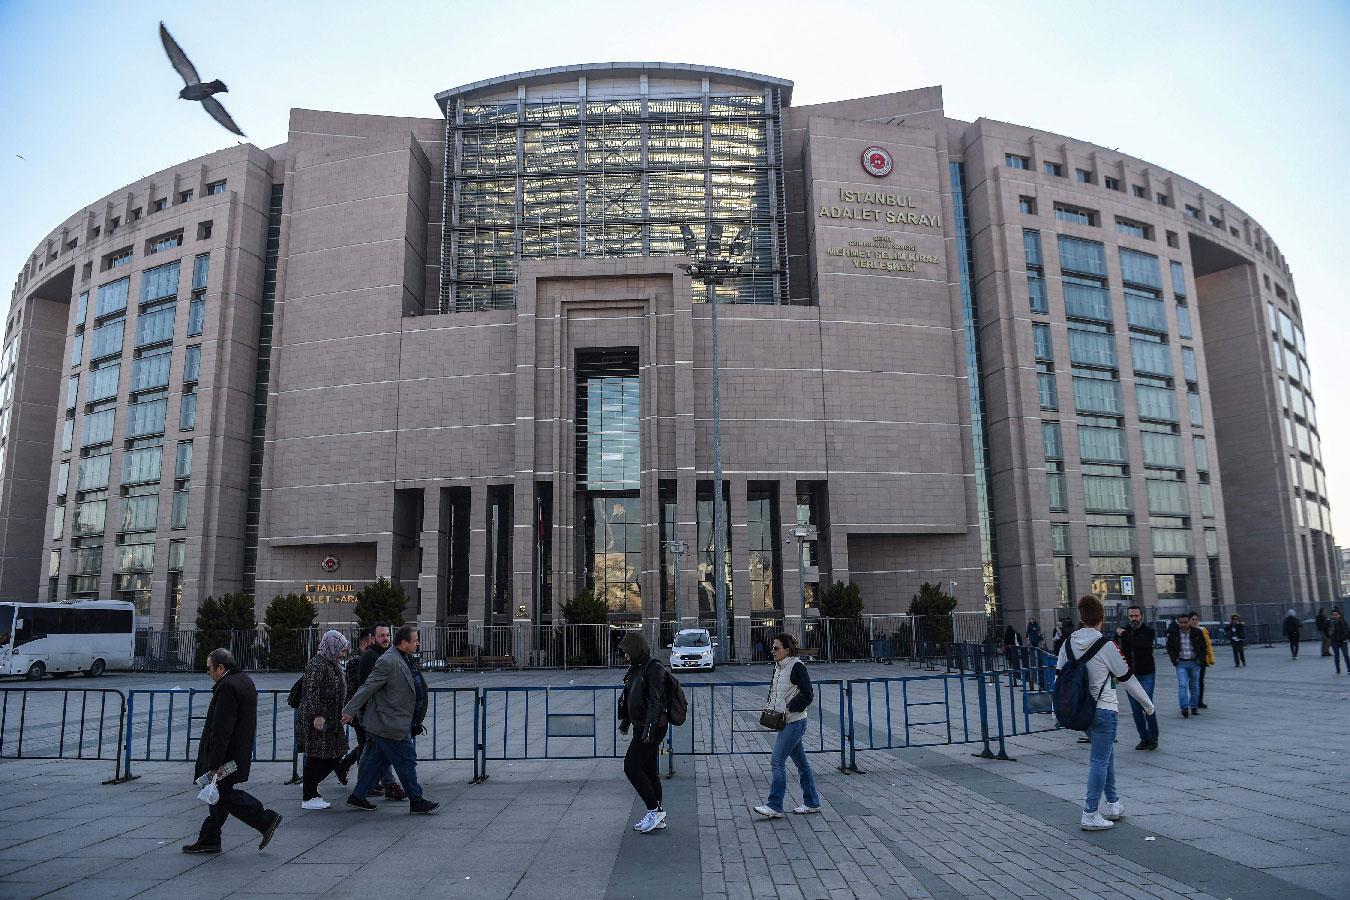 People walk by Istanbul's courthouse on March 26, 2019, during the trial of a US consulate staffer accused of spying and attempting to overthrow the government.